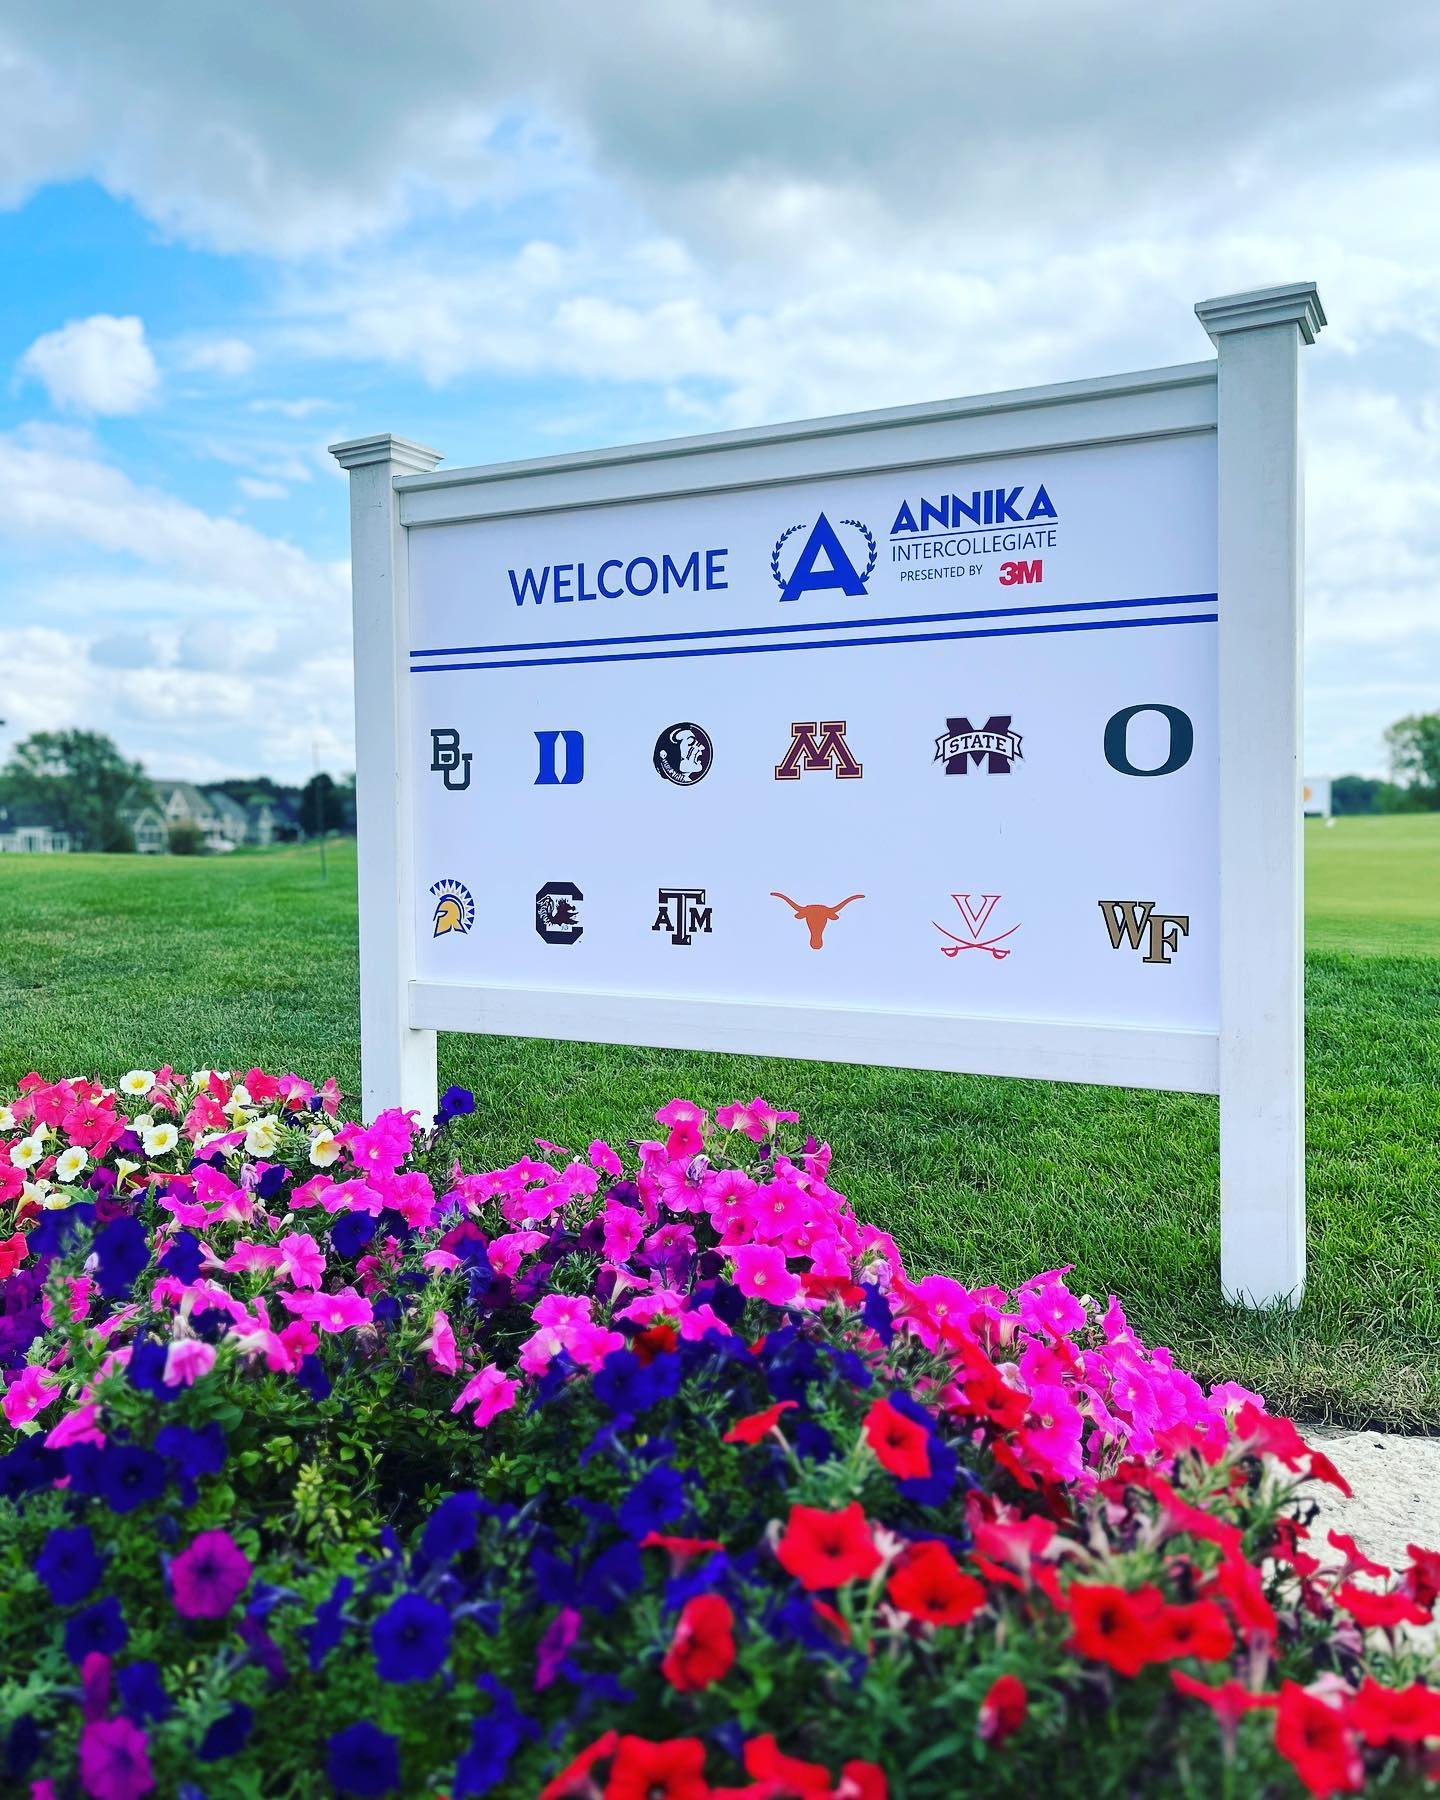 The field for tomorrows ANNIKA Intercollegiate. Play begins at 8:30am. Come out to Royal Club and support these amazing collegiate women players.